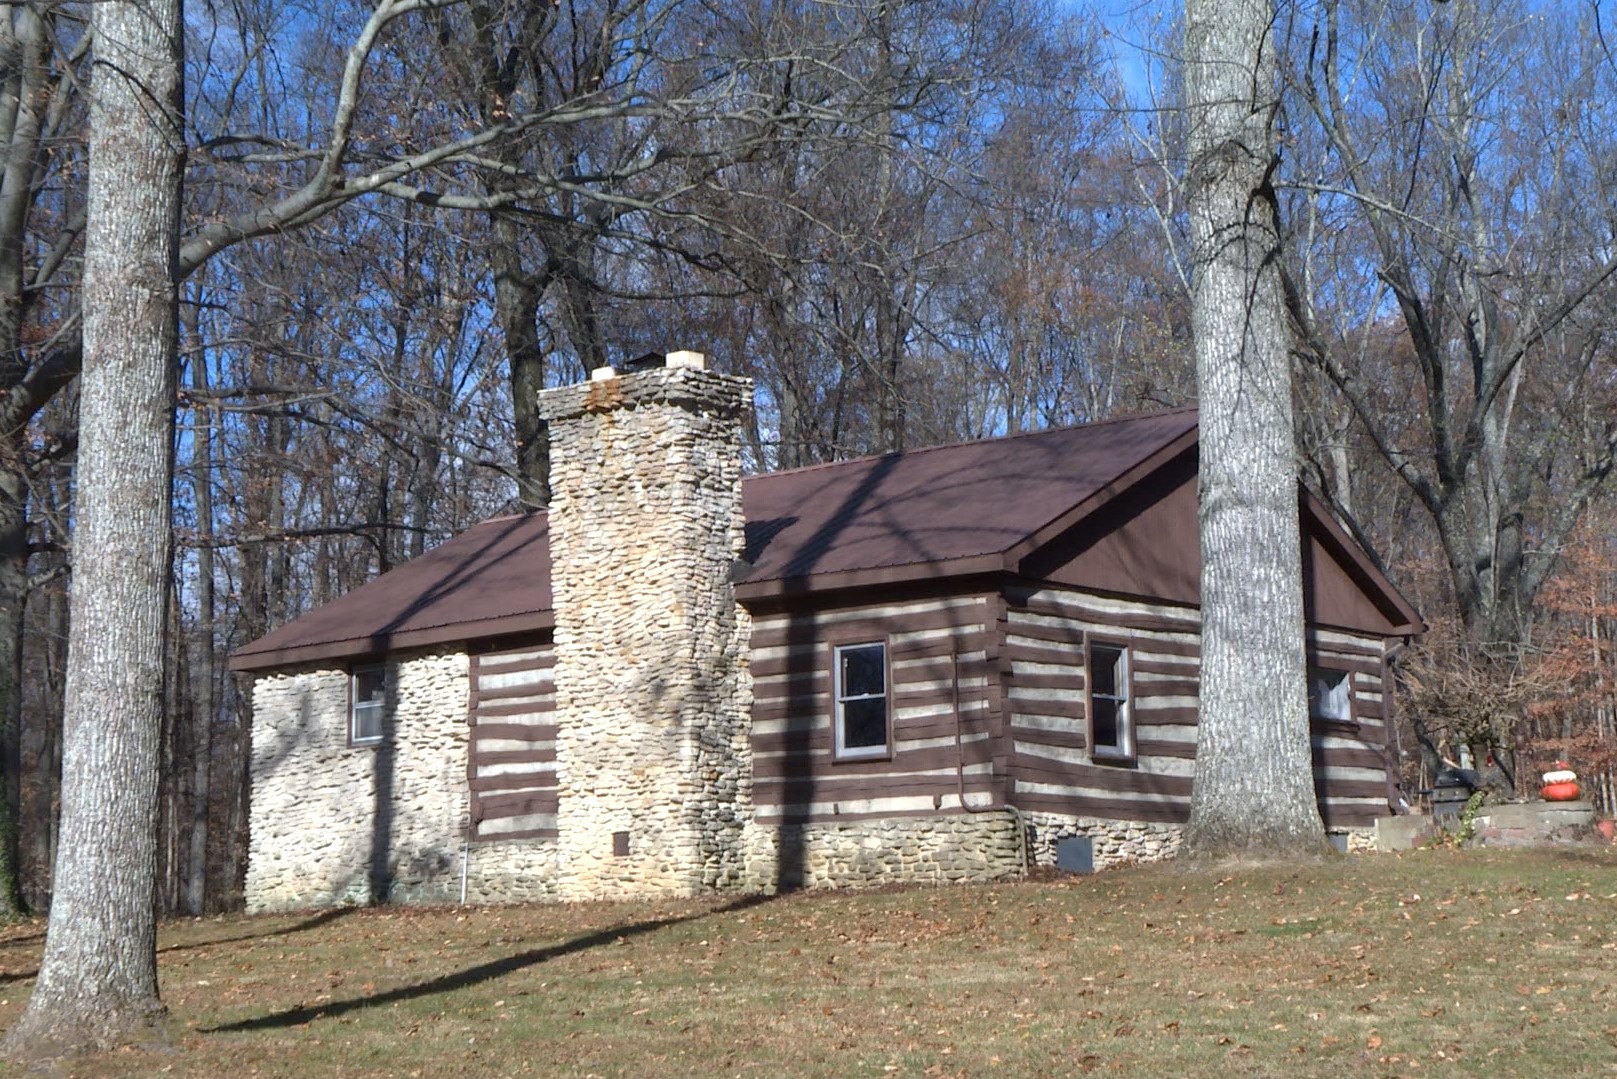 The Herndon's cabin